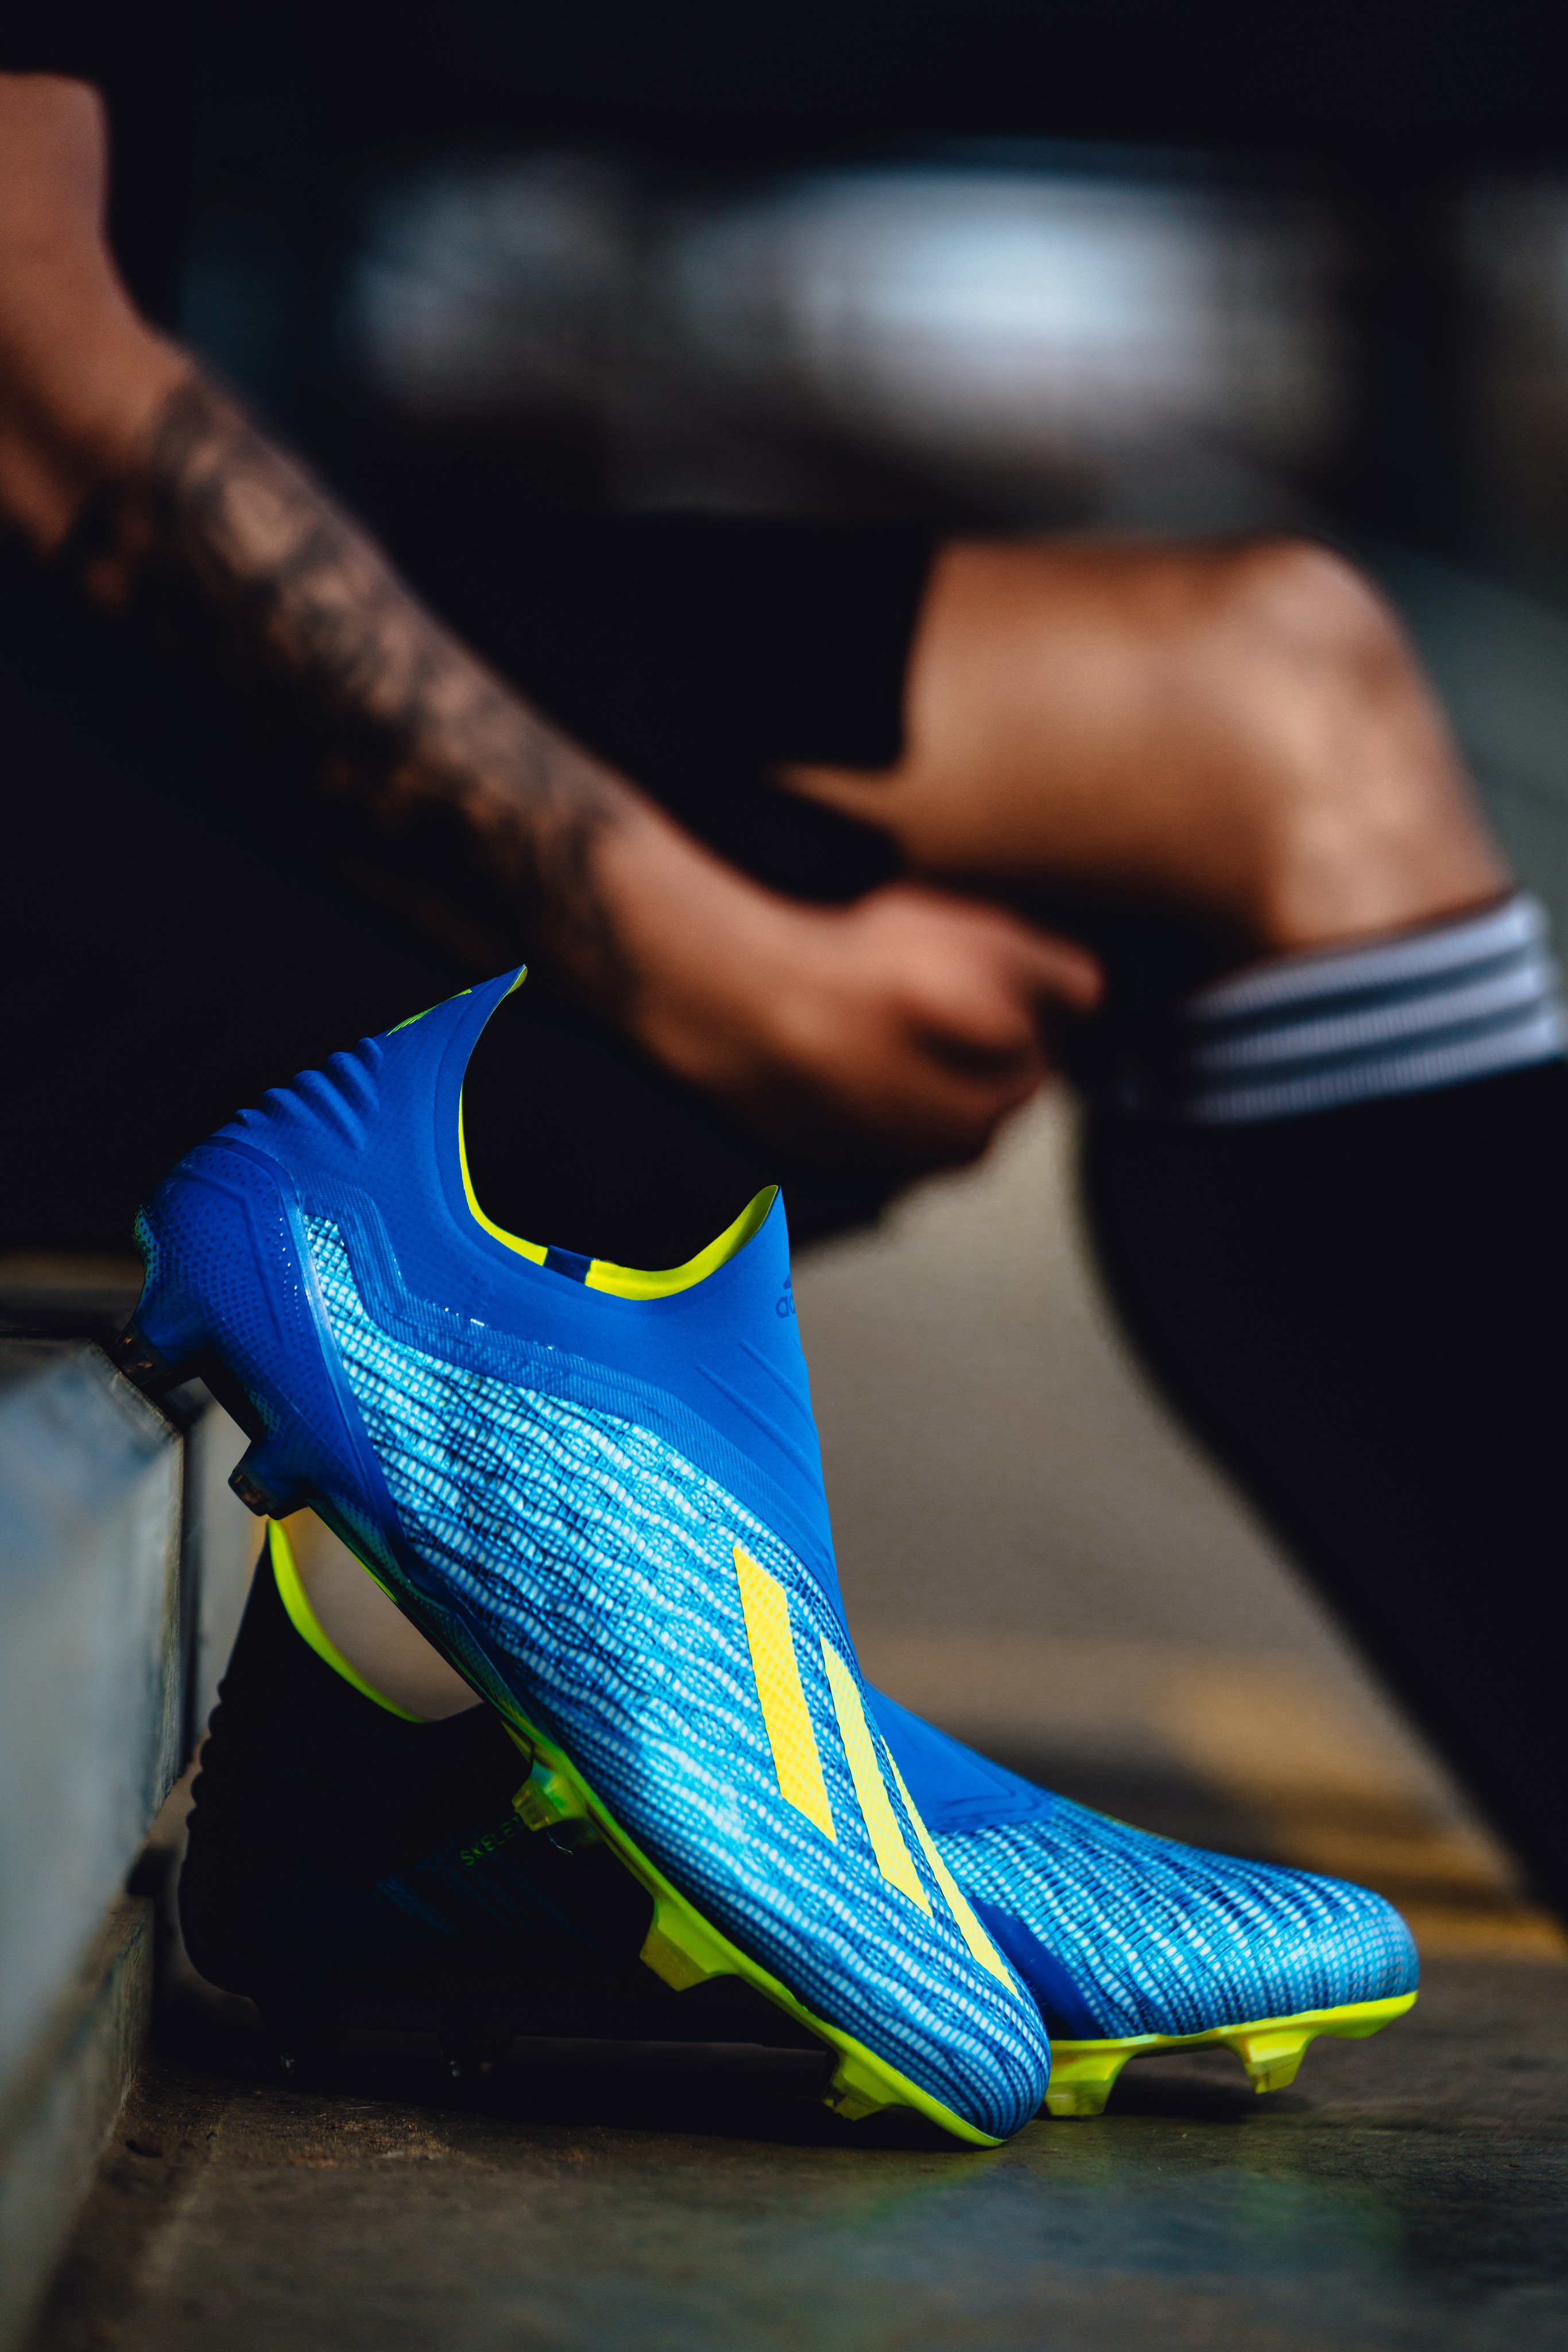 adidas Football on Twitter: "Unleash speed. Introducing the all-new Energy Mode #X18+, exclusively available through adidas and partners. 👉https://t.co/1ov2Ks3UJY 👈 #HereToCreate https://t.co/qhzMO7cX6X" / Twitter